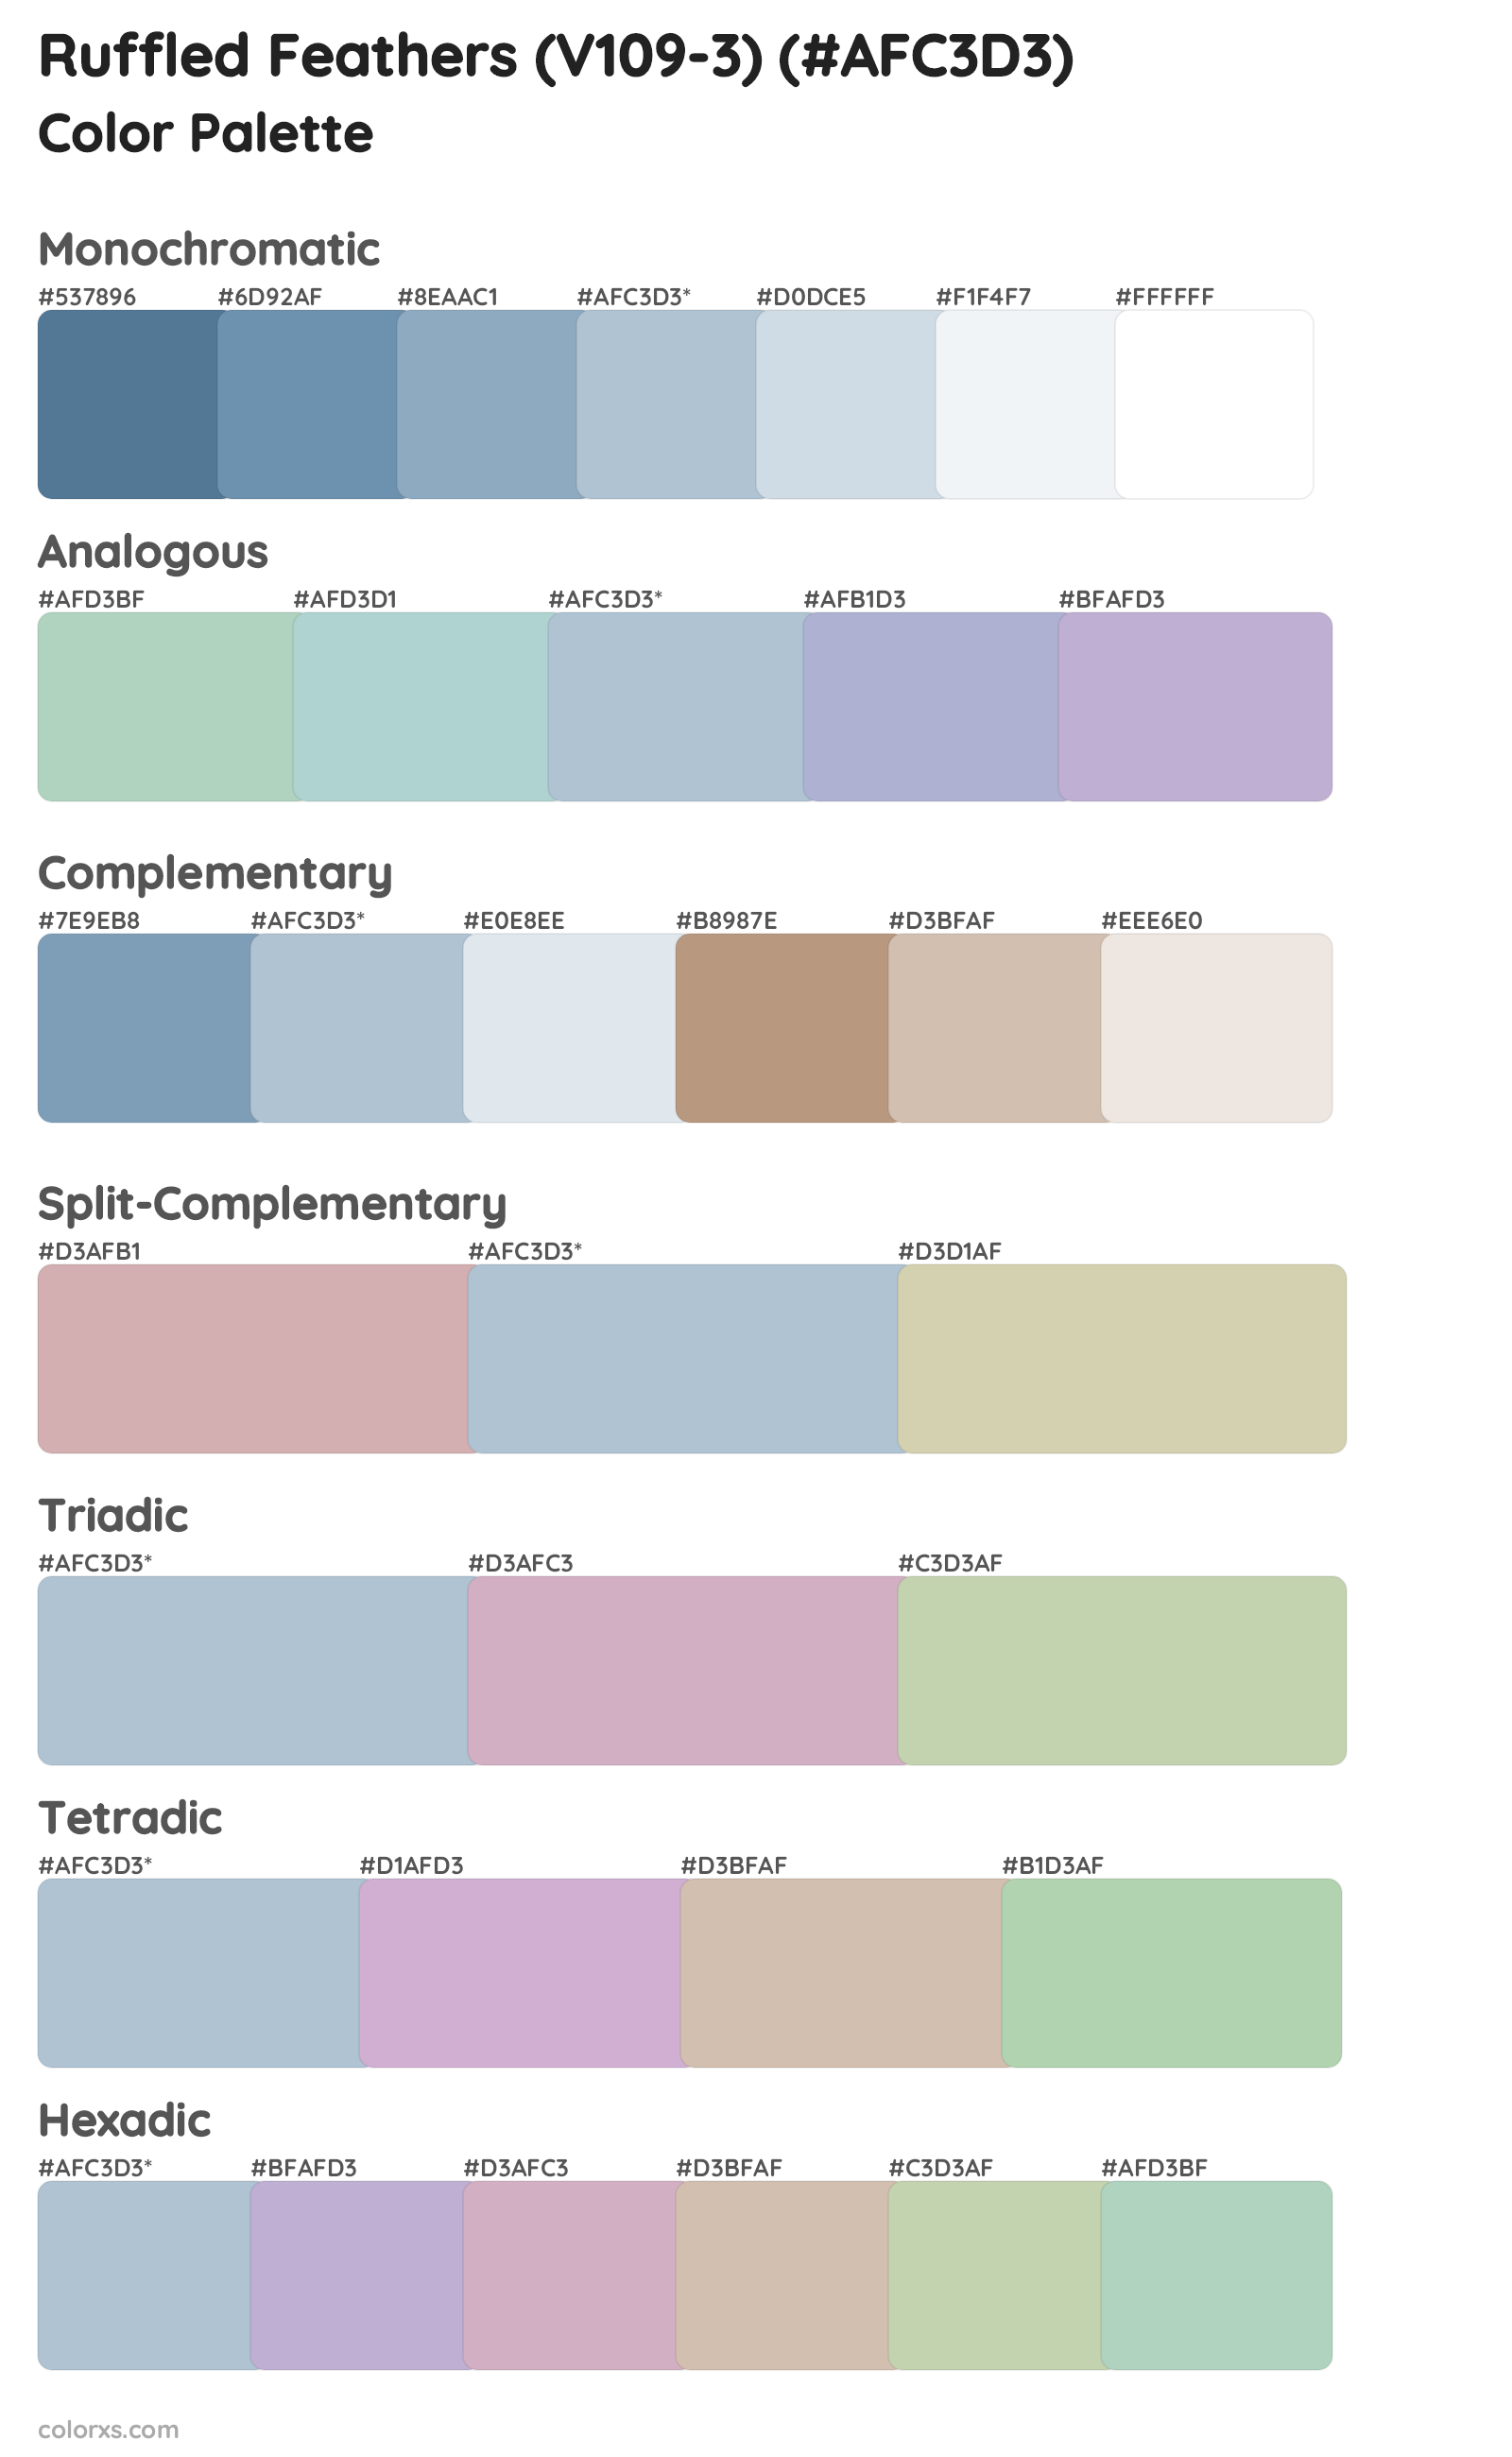 Ruffled Feathers (V109-3) Color Scheme Palettes